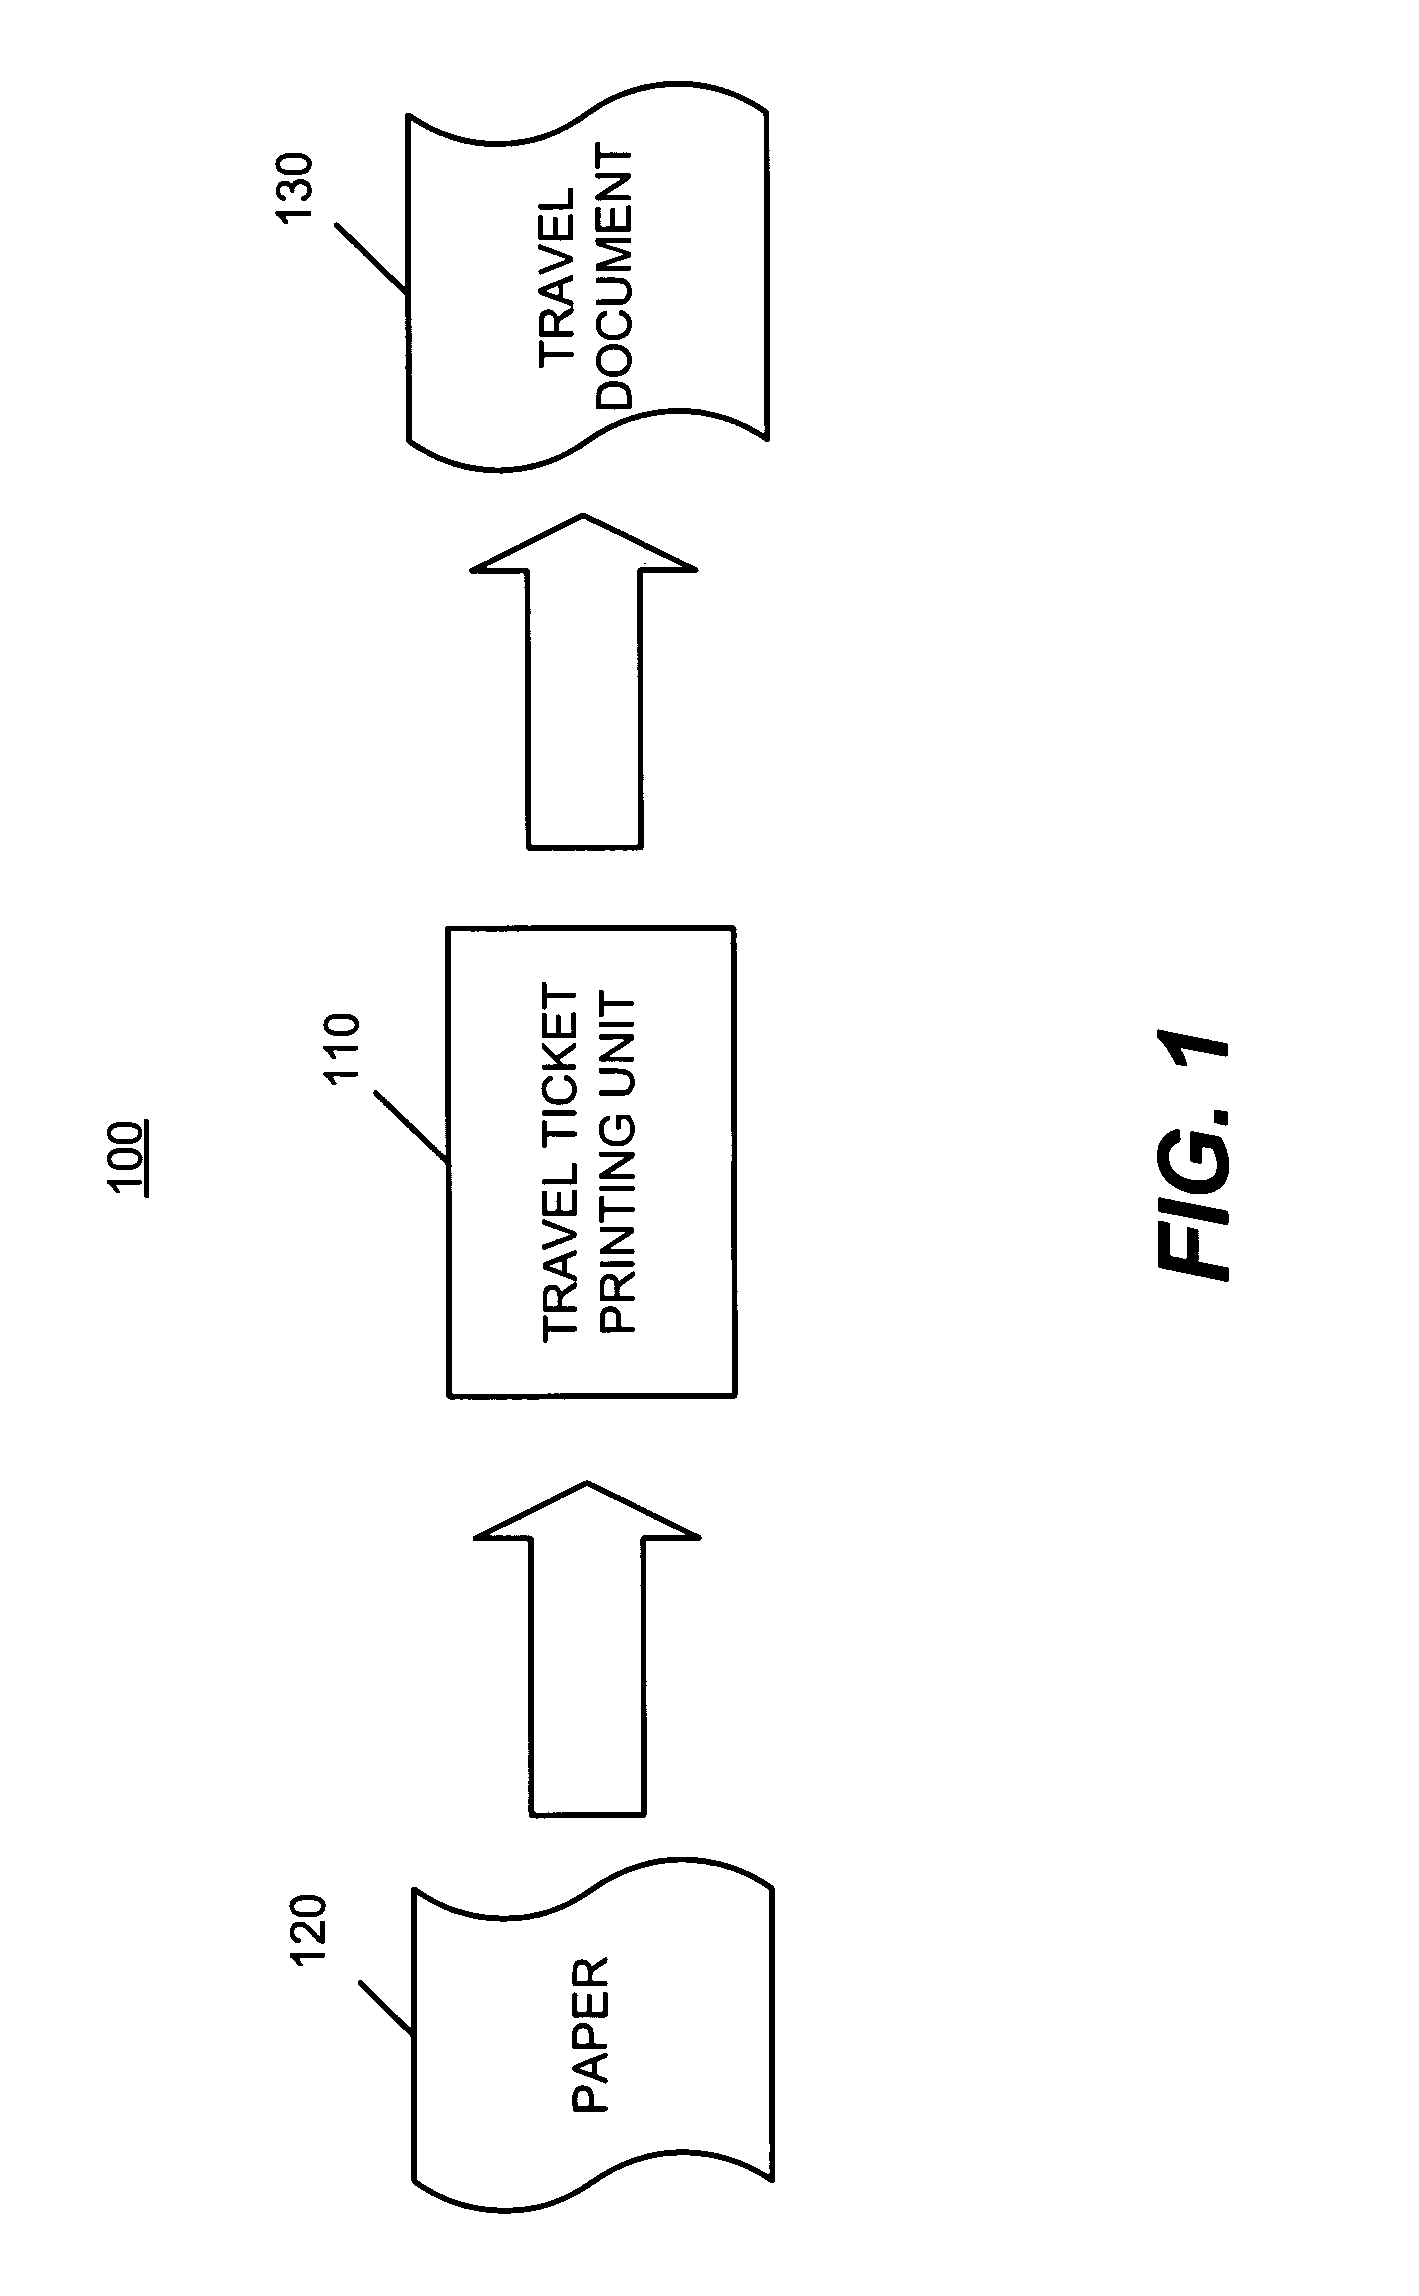 Method and apparatus for printing travel documents